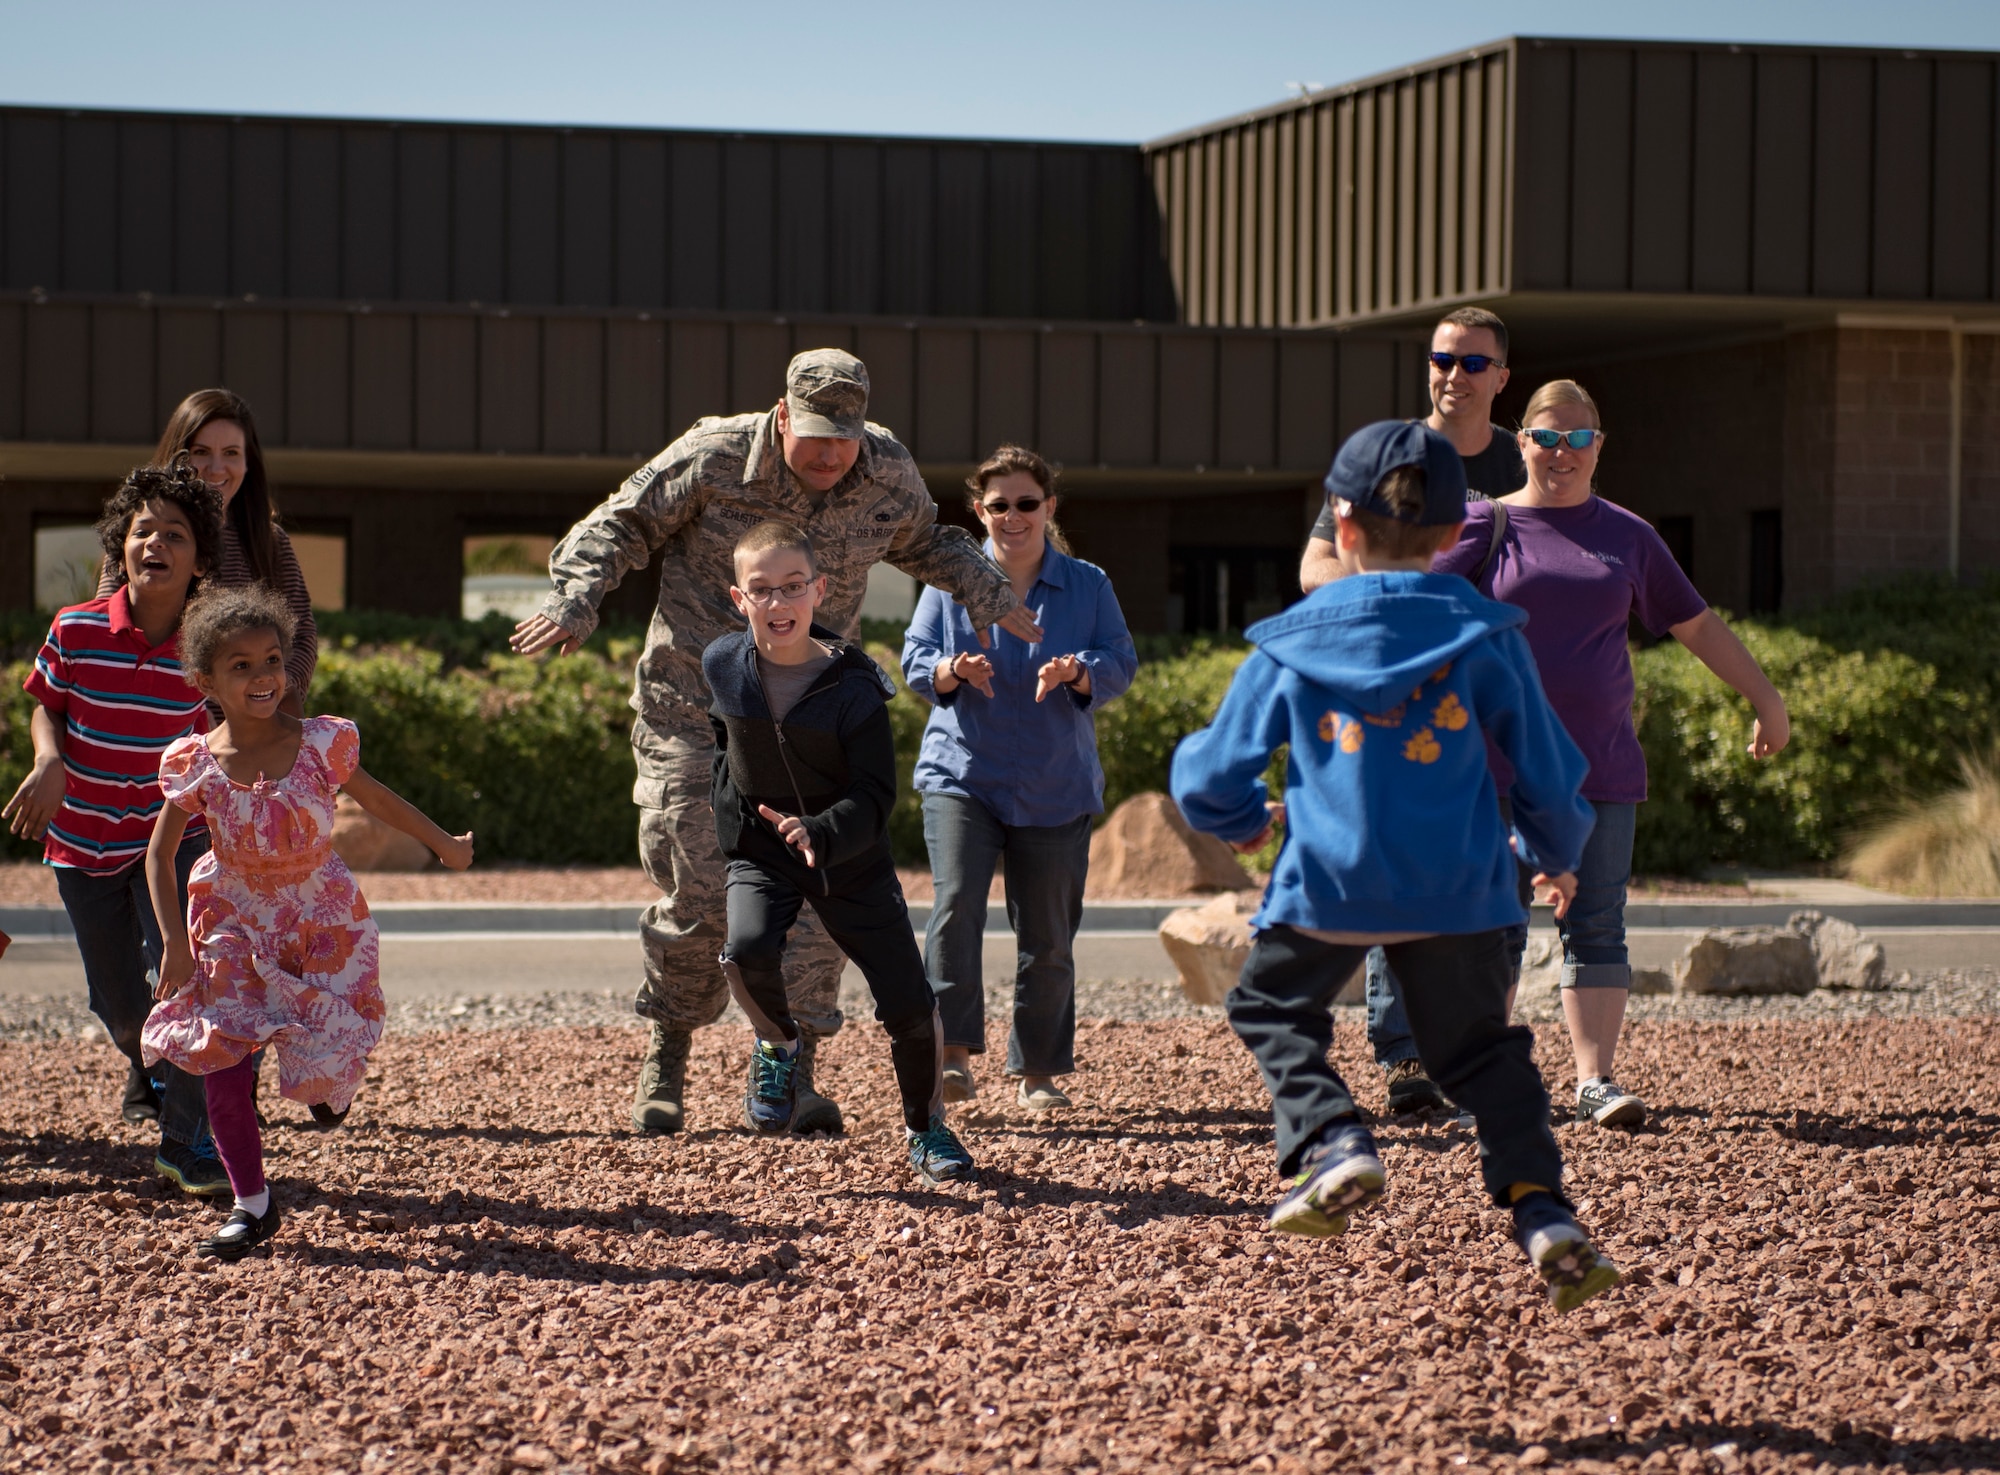 Participants play a game of tag during a Leave No Trace workshop at Nellis Air Force Base, Nevada, March 28, 2018. The game simulated how invasive species can have a negative impact on the environment. (U.S. Air Force photo by Airman 1st Class Andrew D. Sarver)